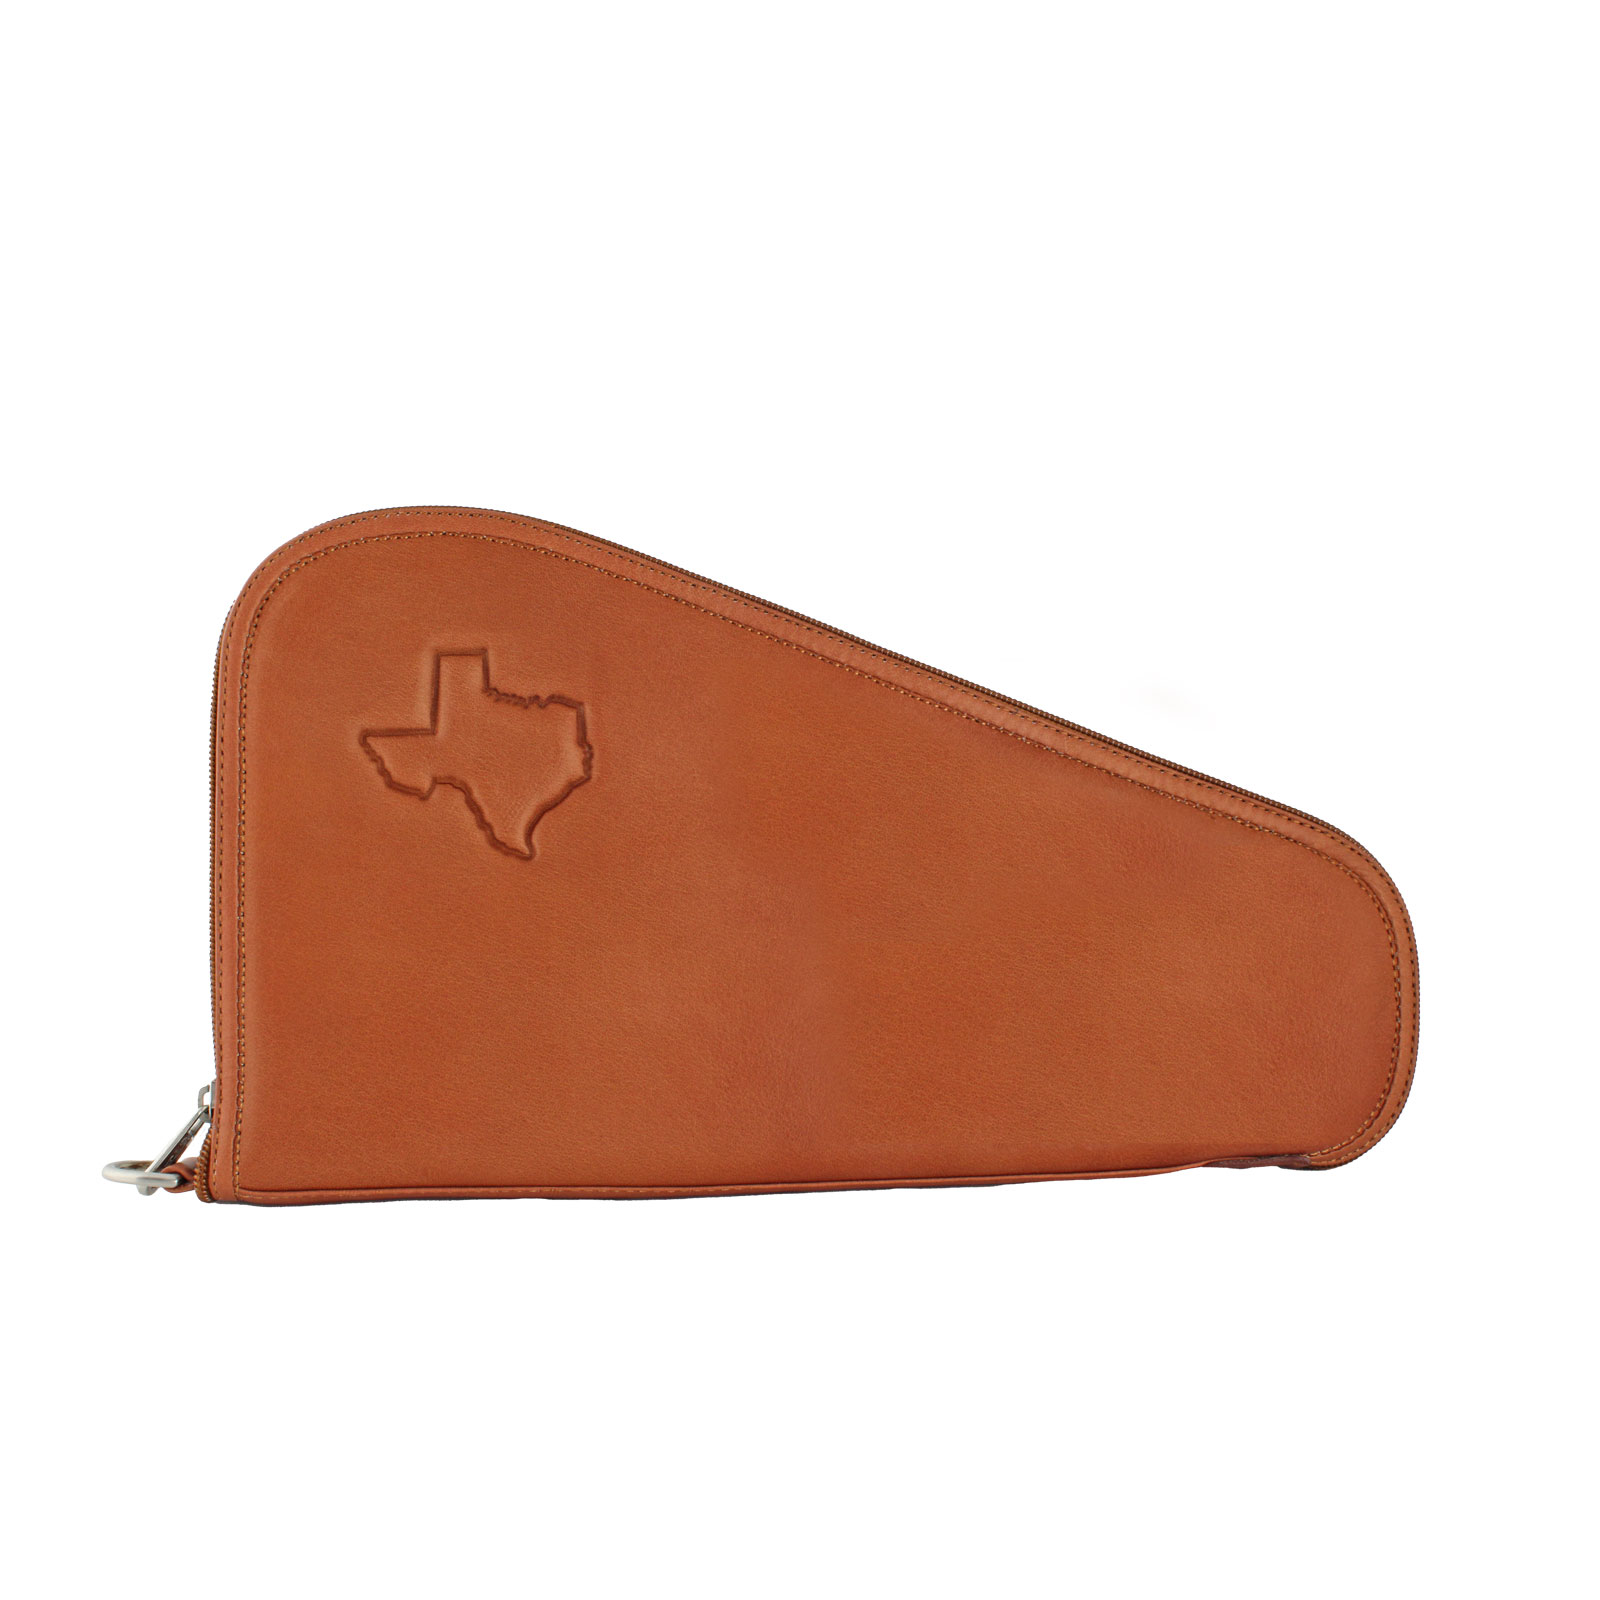 Texas Embossed Leather Zippered Pistol Case